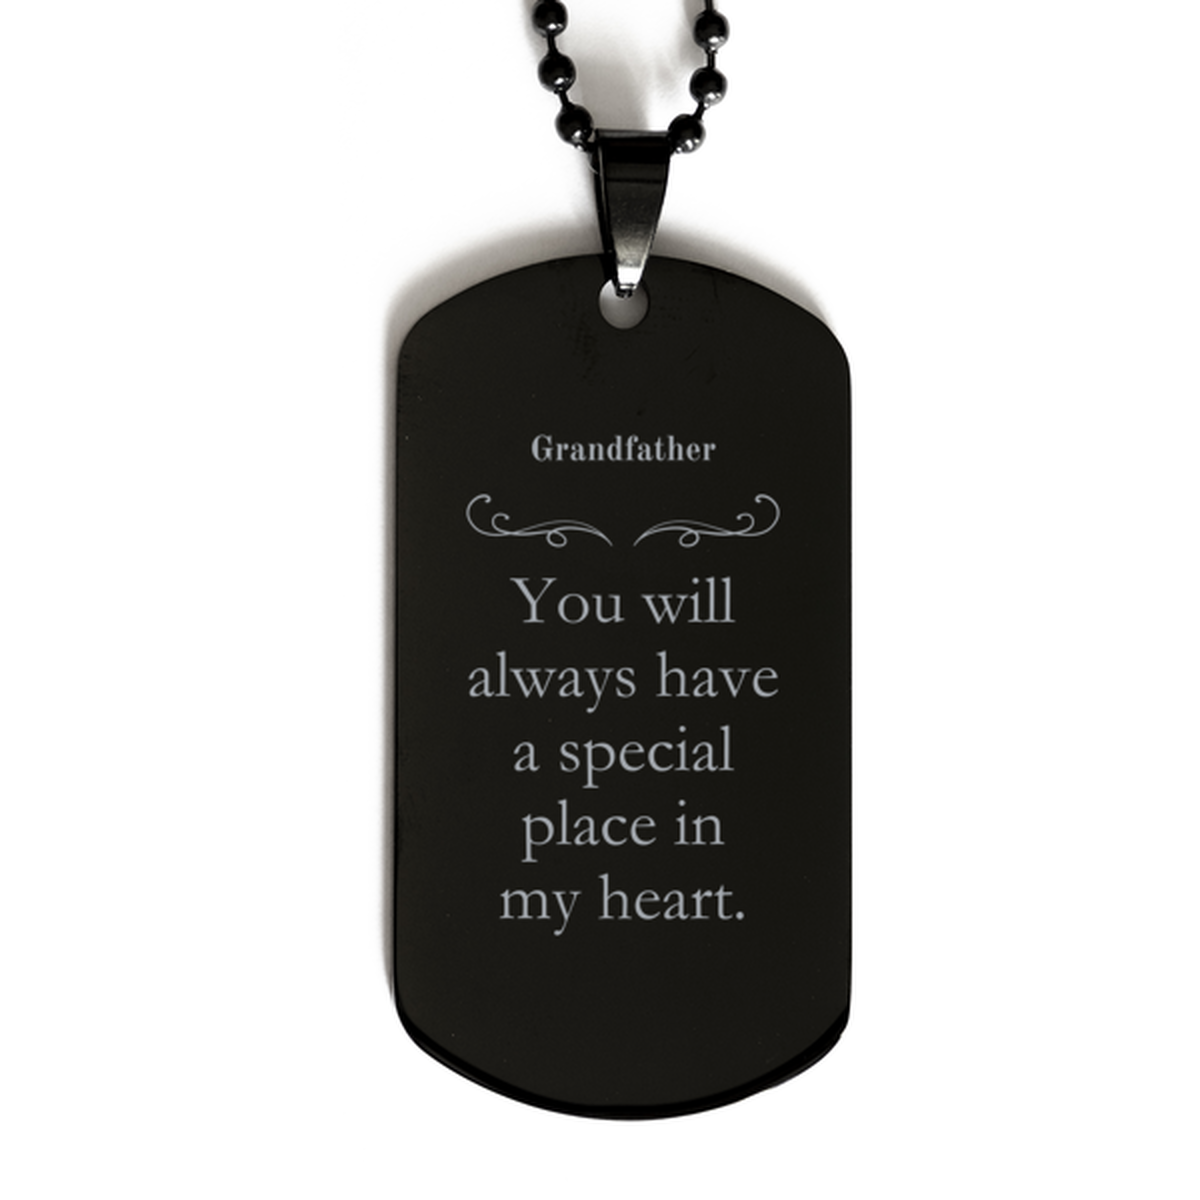 Grandfather Black Dog Tag Engraved Special Place Heart Veteran Gift